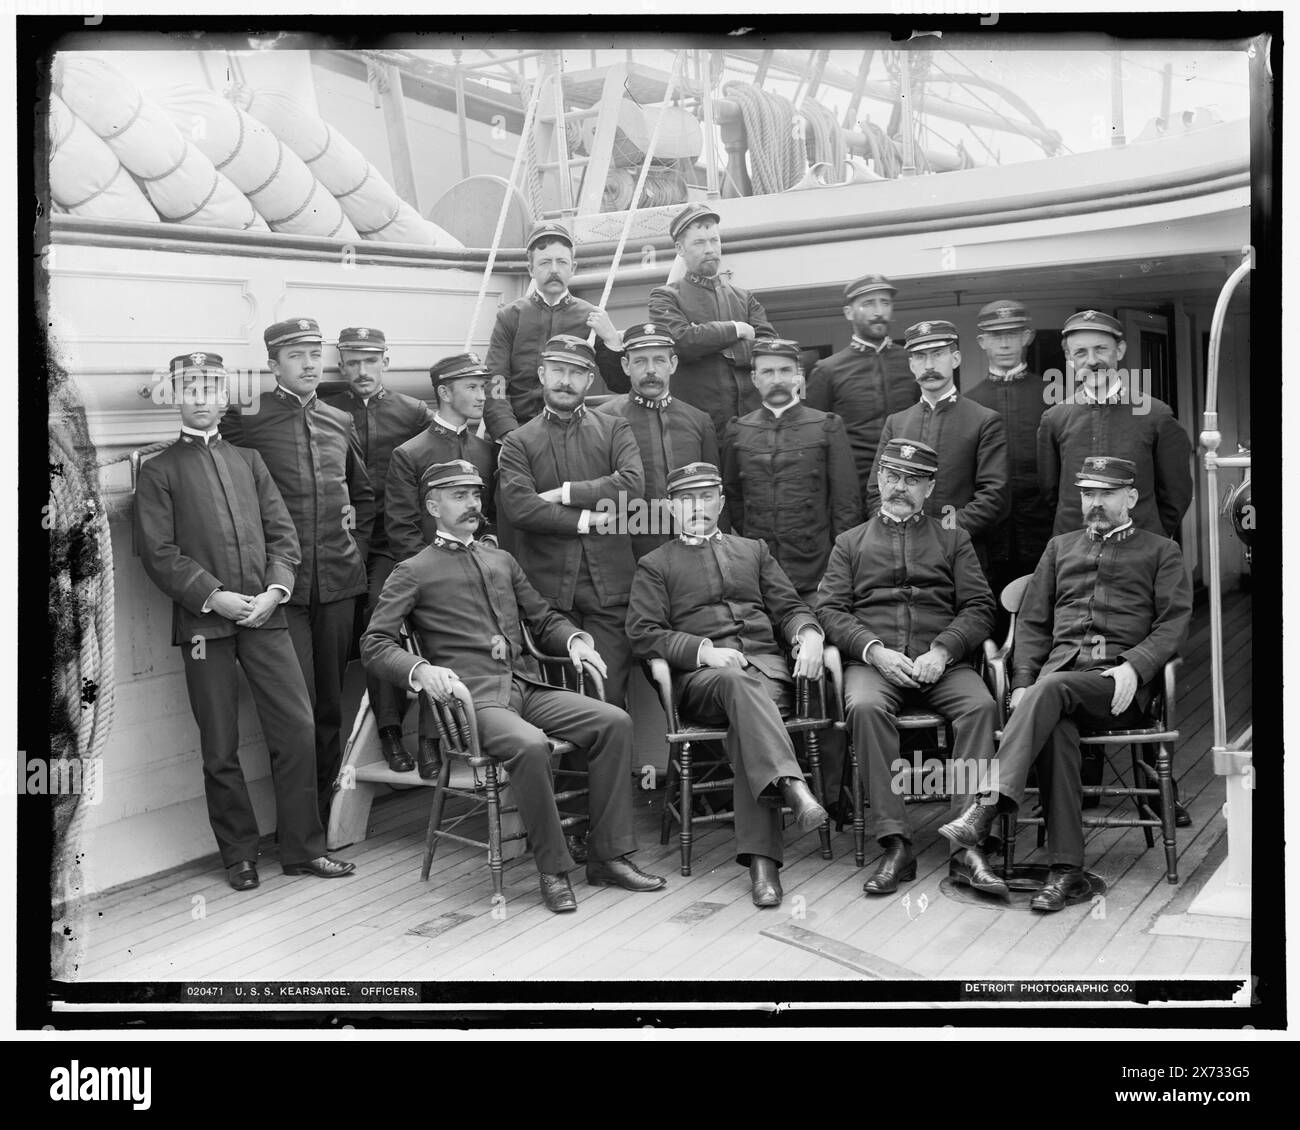 U.S.S. Kearsarge officers, Date based on Detroit, Catalogue J (1901)., Detroit Publishing Co. no. 020471., Gift; State Historical Society of Colorado; 1949,  Kearsarge (Screw sloop-of-war) , Military officers, American. Stock Photo